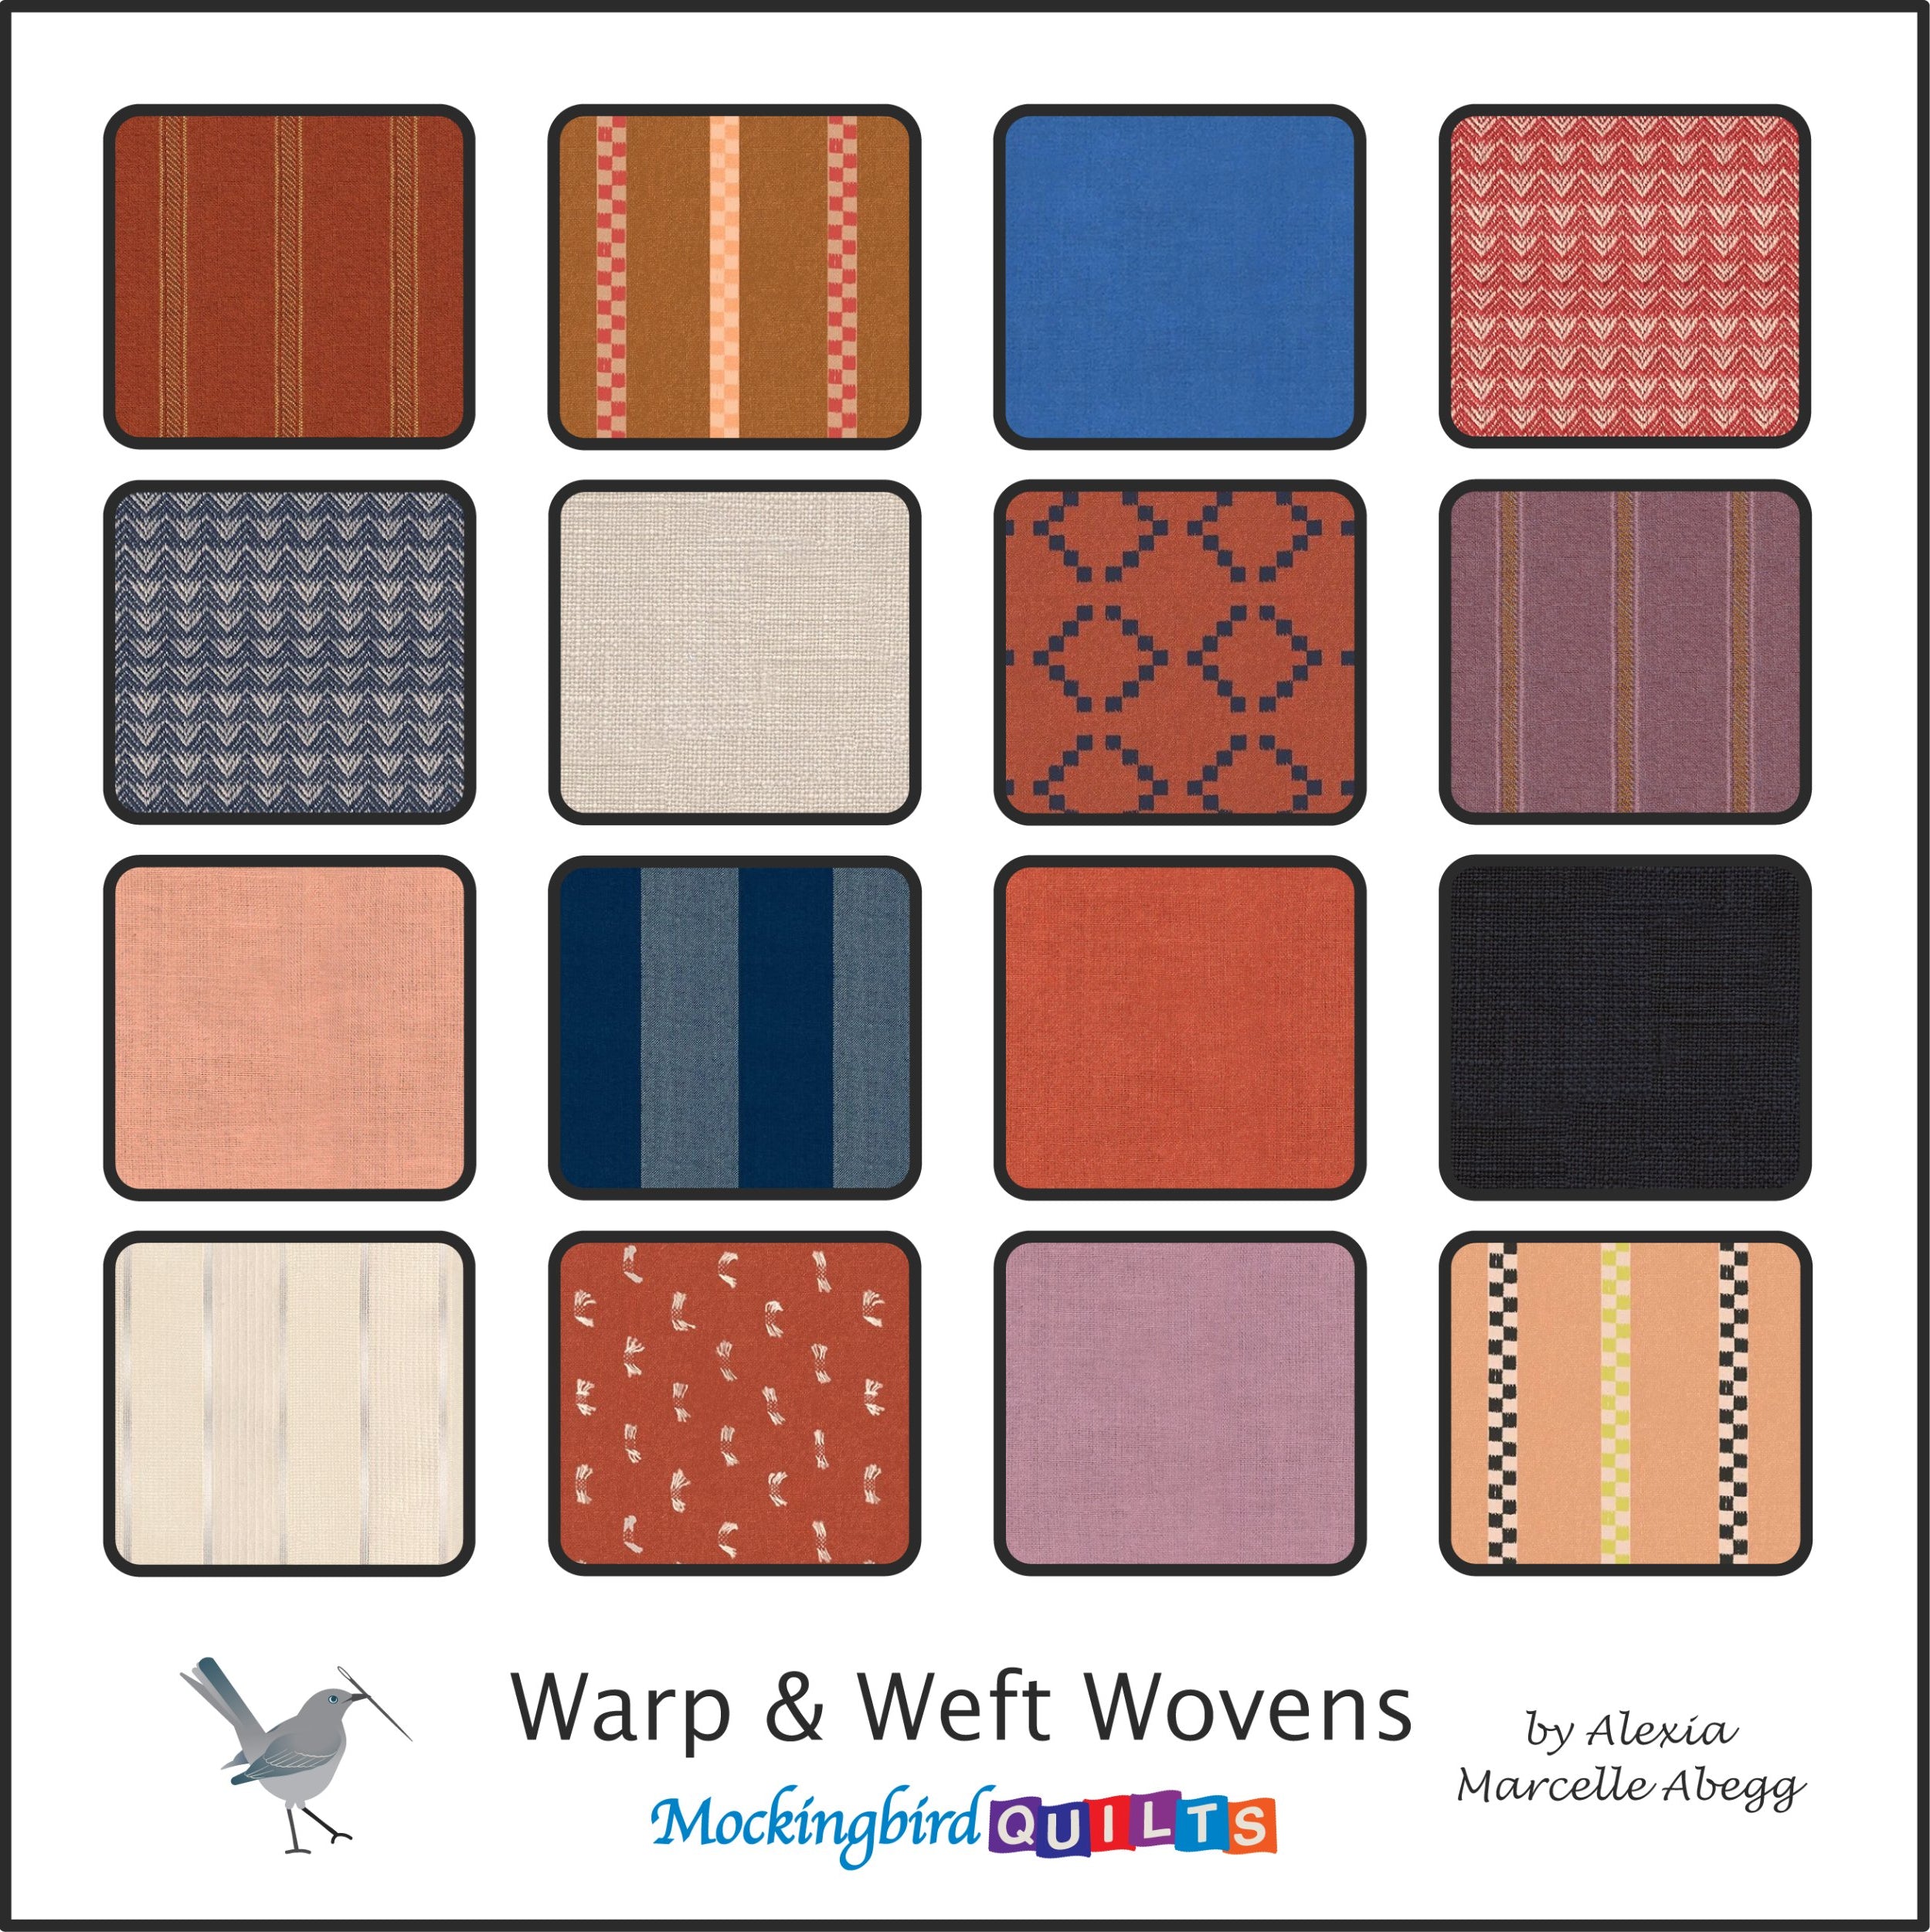 Warp & Weft Wovens by Alexia Marcelle Abegg